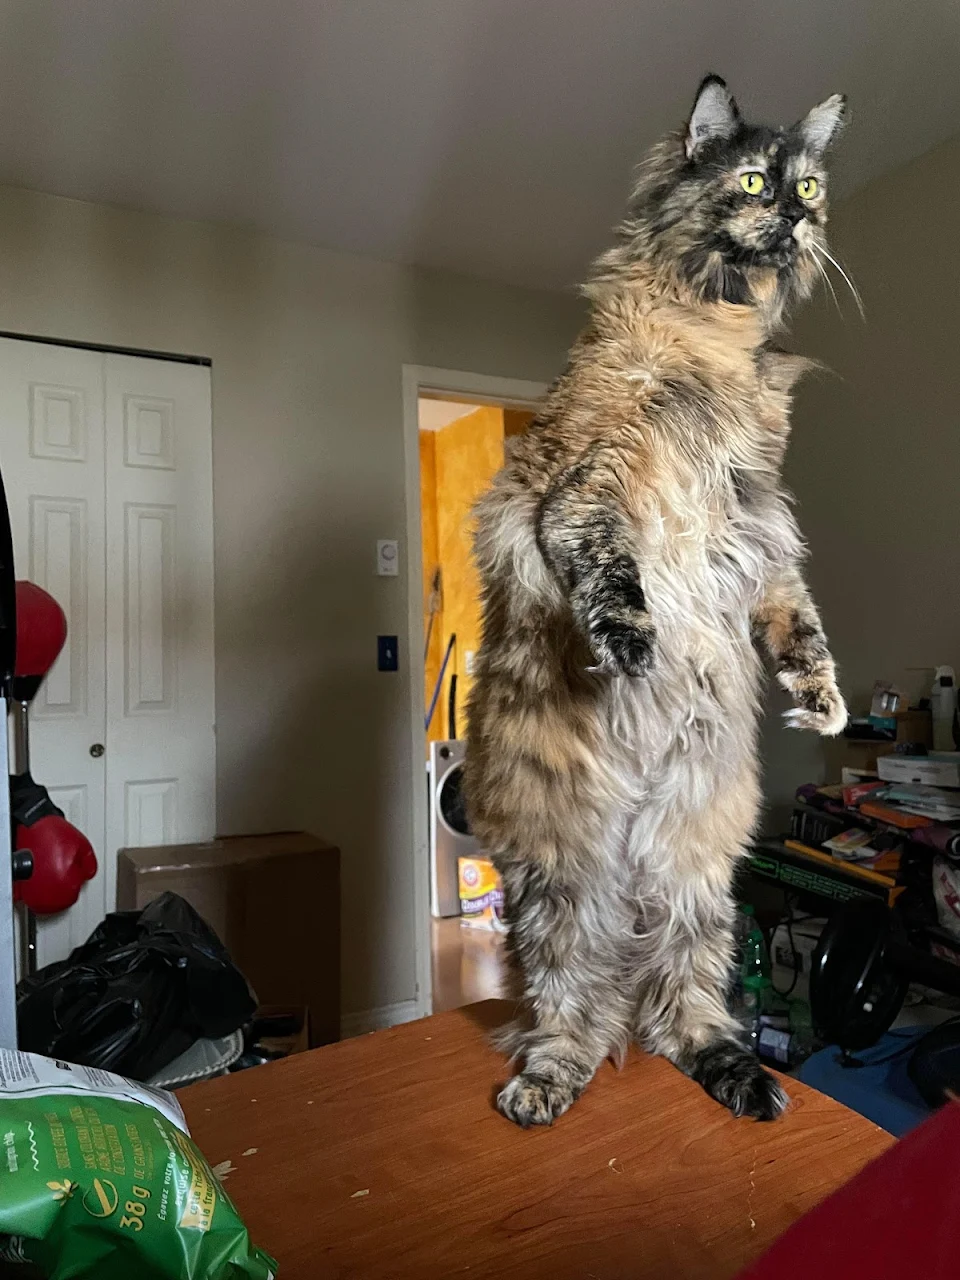 A cat fully standing up on its hind legs.